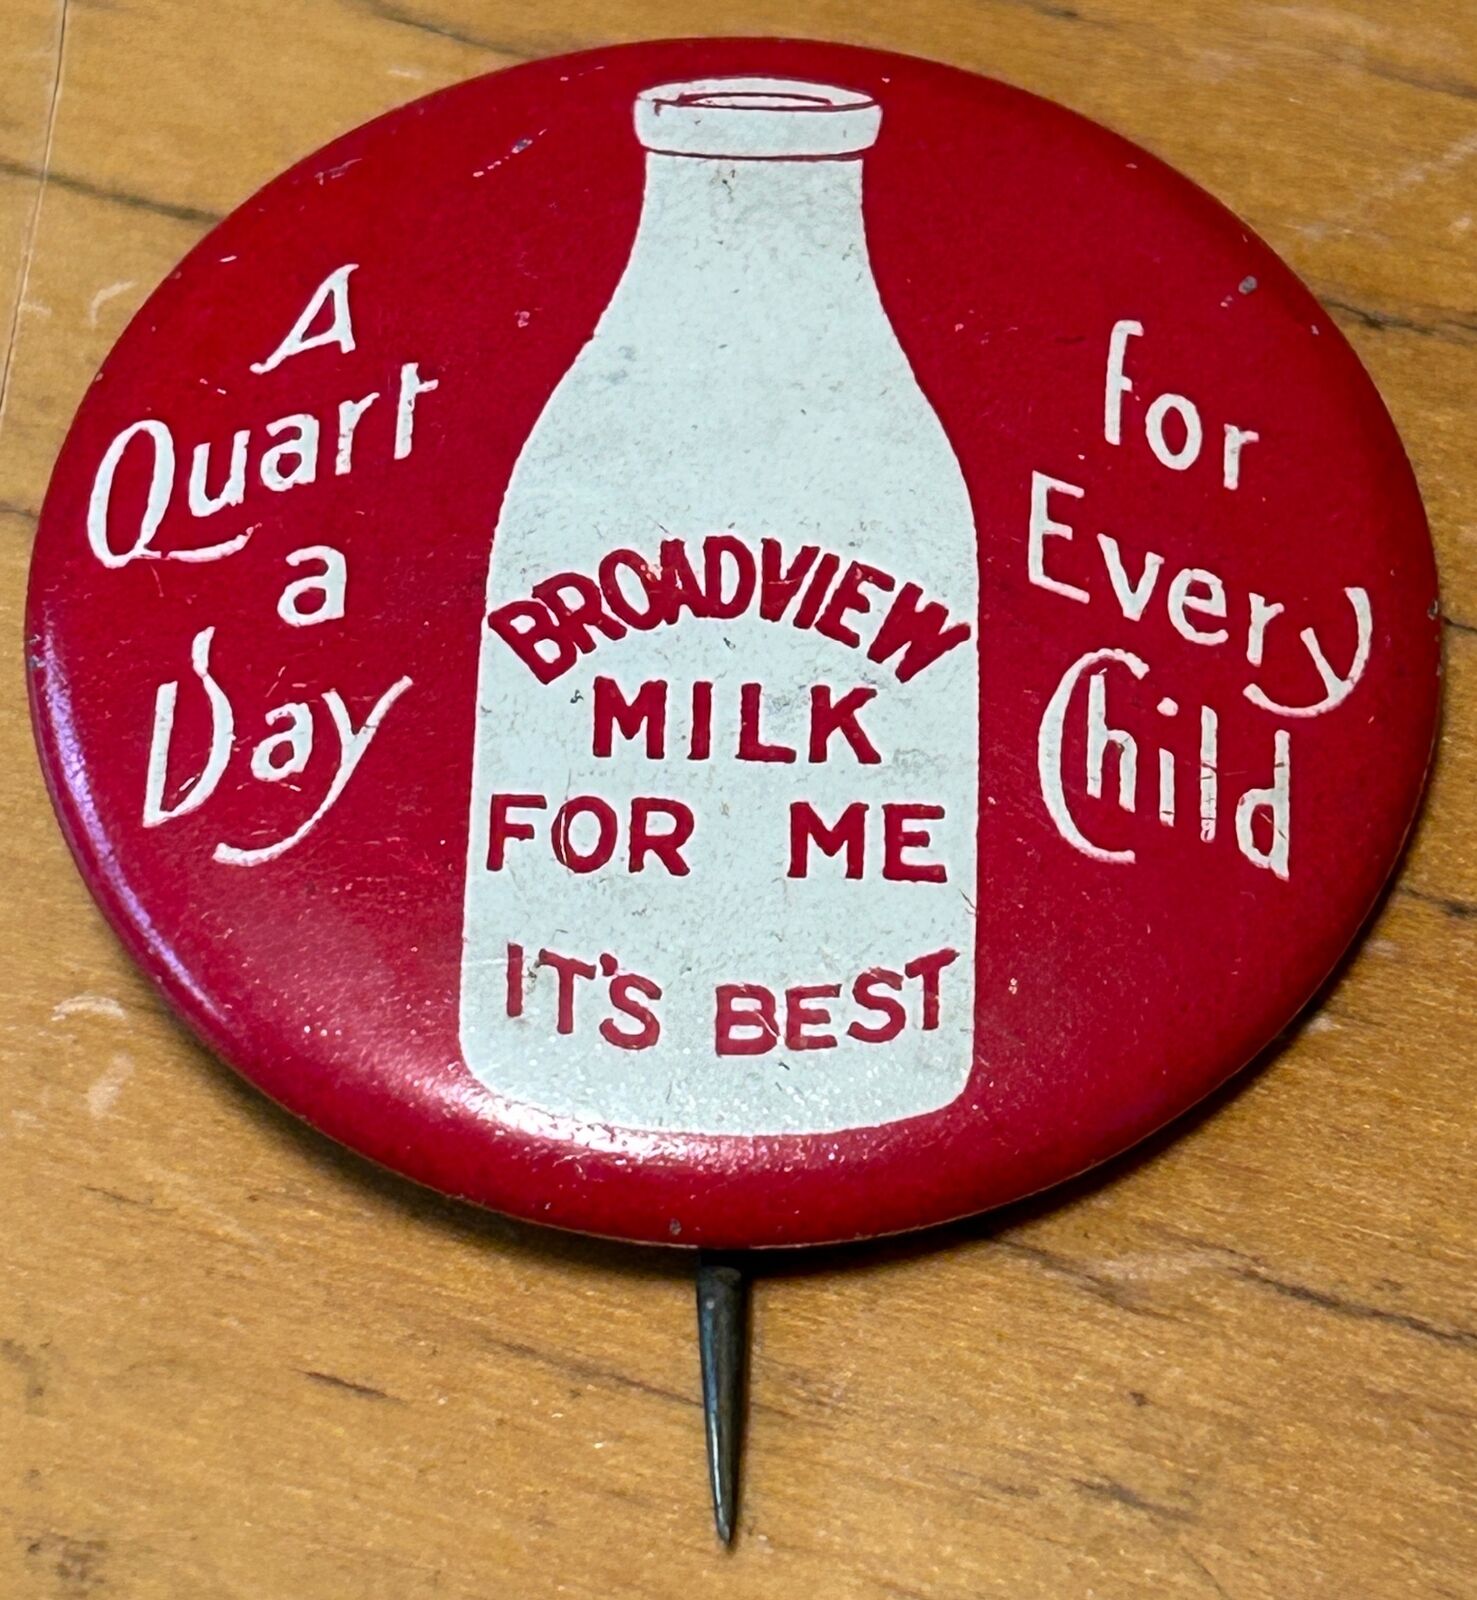 OLD BROADVIEW MILK FOR ME SPOKANE WA QUART A DAY FOR EVERY CHILD PINBACK BUTTON 